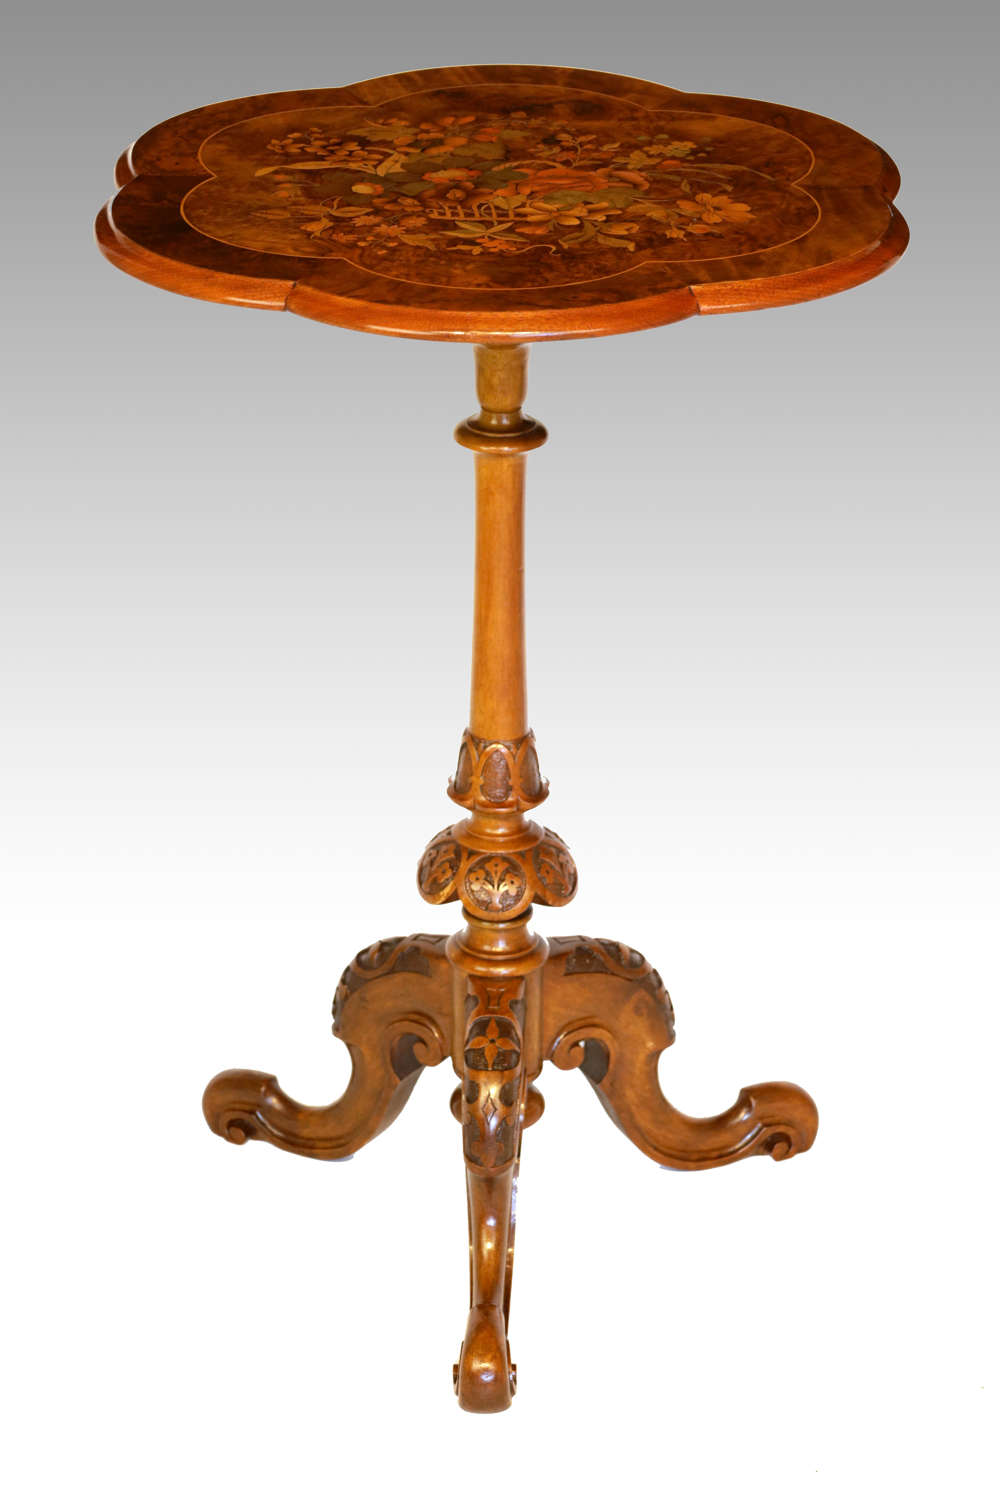 A Fine Quality Victorian Burr-Walnut Inlaid Shaped Moulded Edge Table